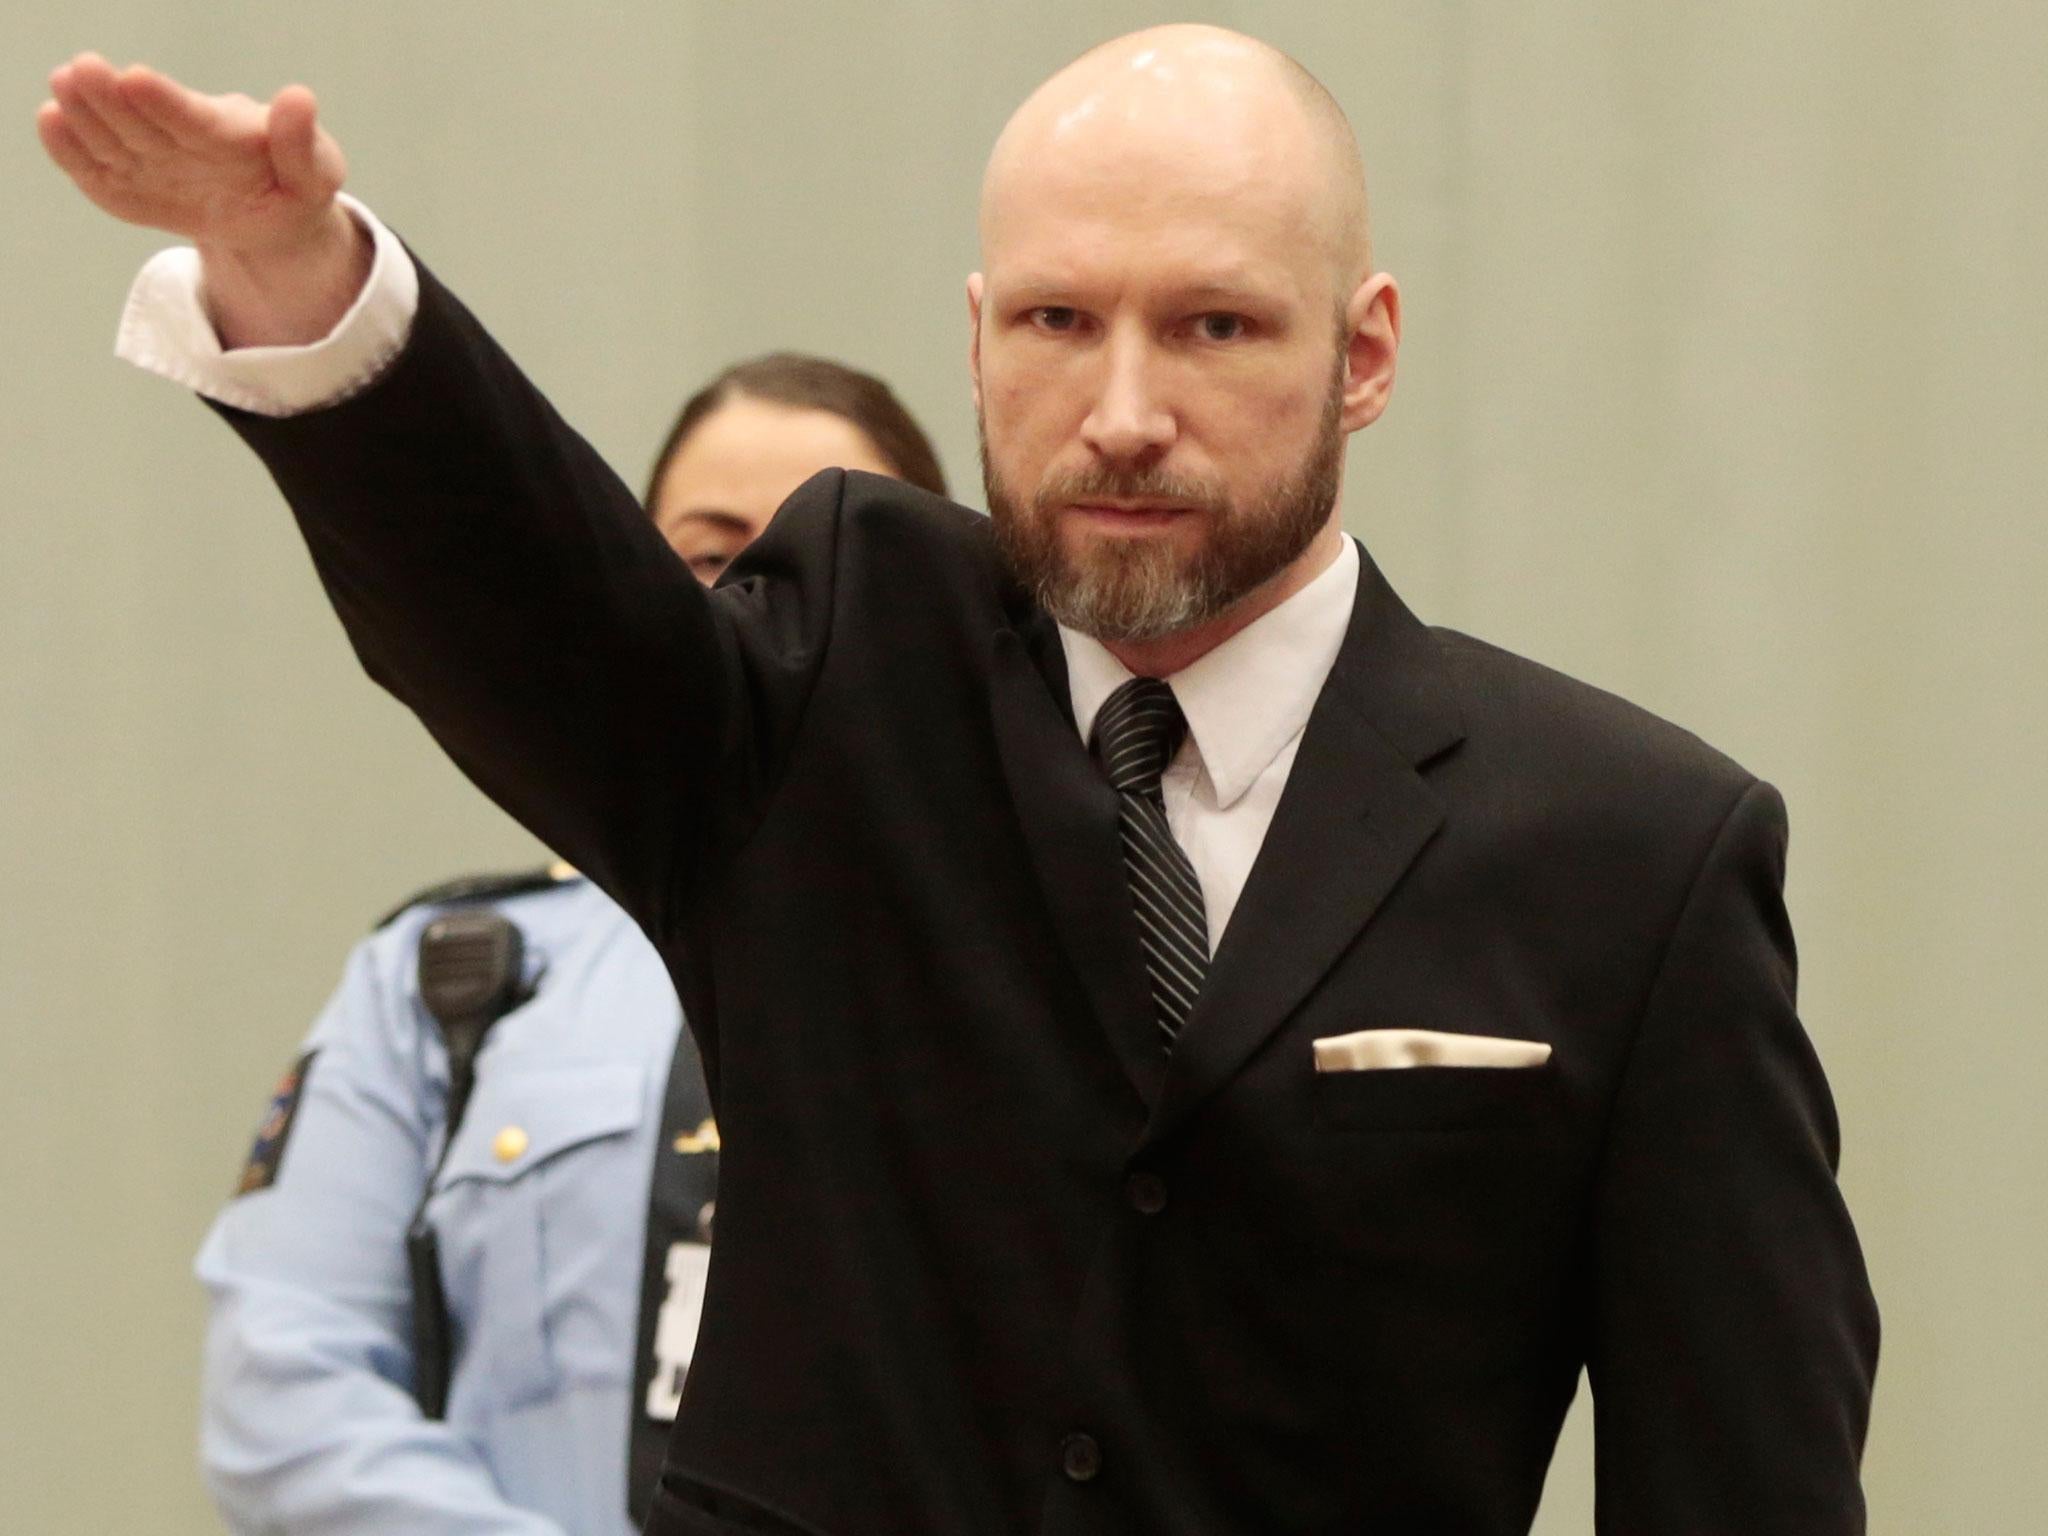 The Norwegian mass murderer has repeatedly performed the Nazi salute during court appearances